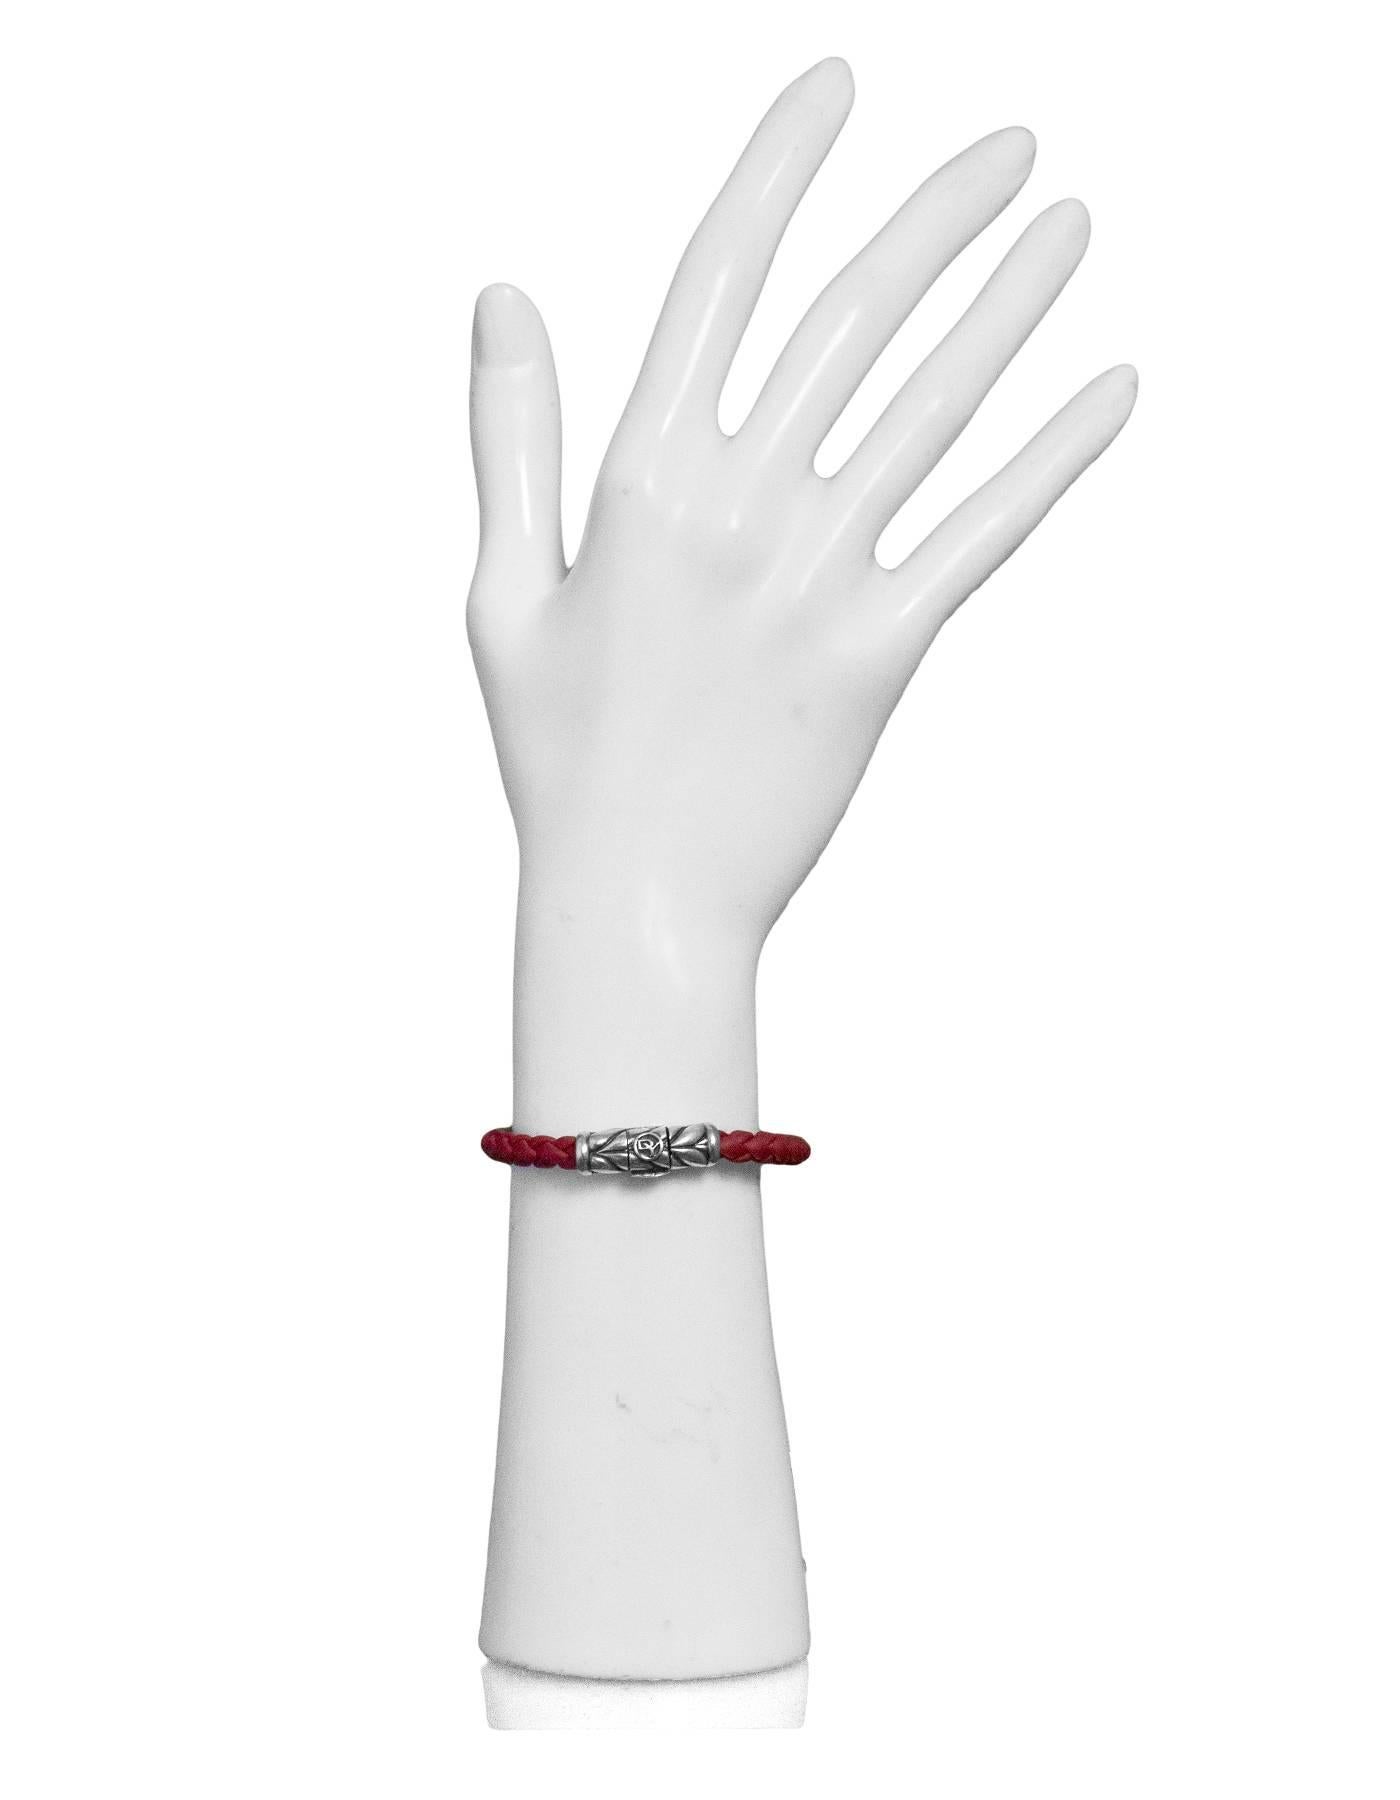 David Yurman 6mm Red Chevron Woven Rubber Bracelet

Color: Red, silver
Materials: Rubber, sterling
Closure/Opening: Push-tab with magnet
Stamp: D.Yurman 925
Retail Price: $295 + tax
Overall Condition: Excellent pre-owned condition with the exception